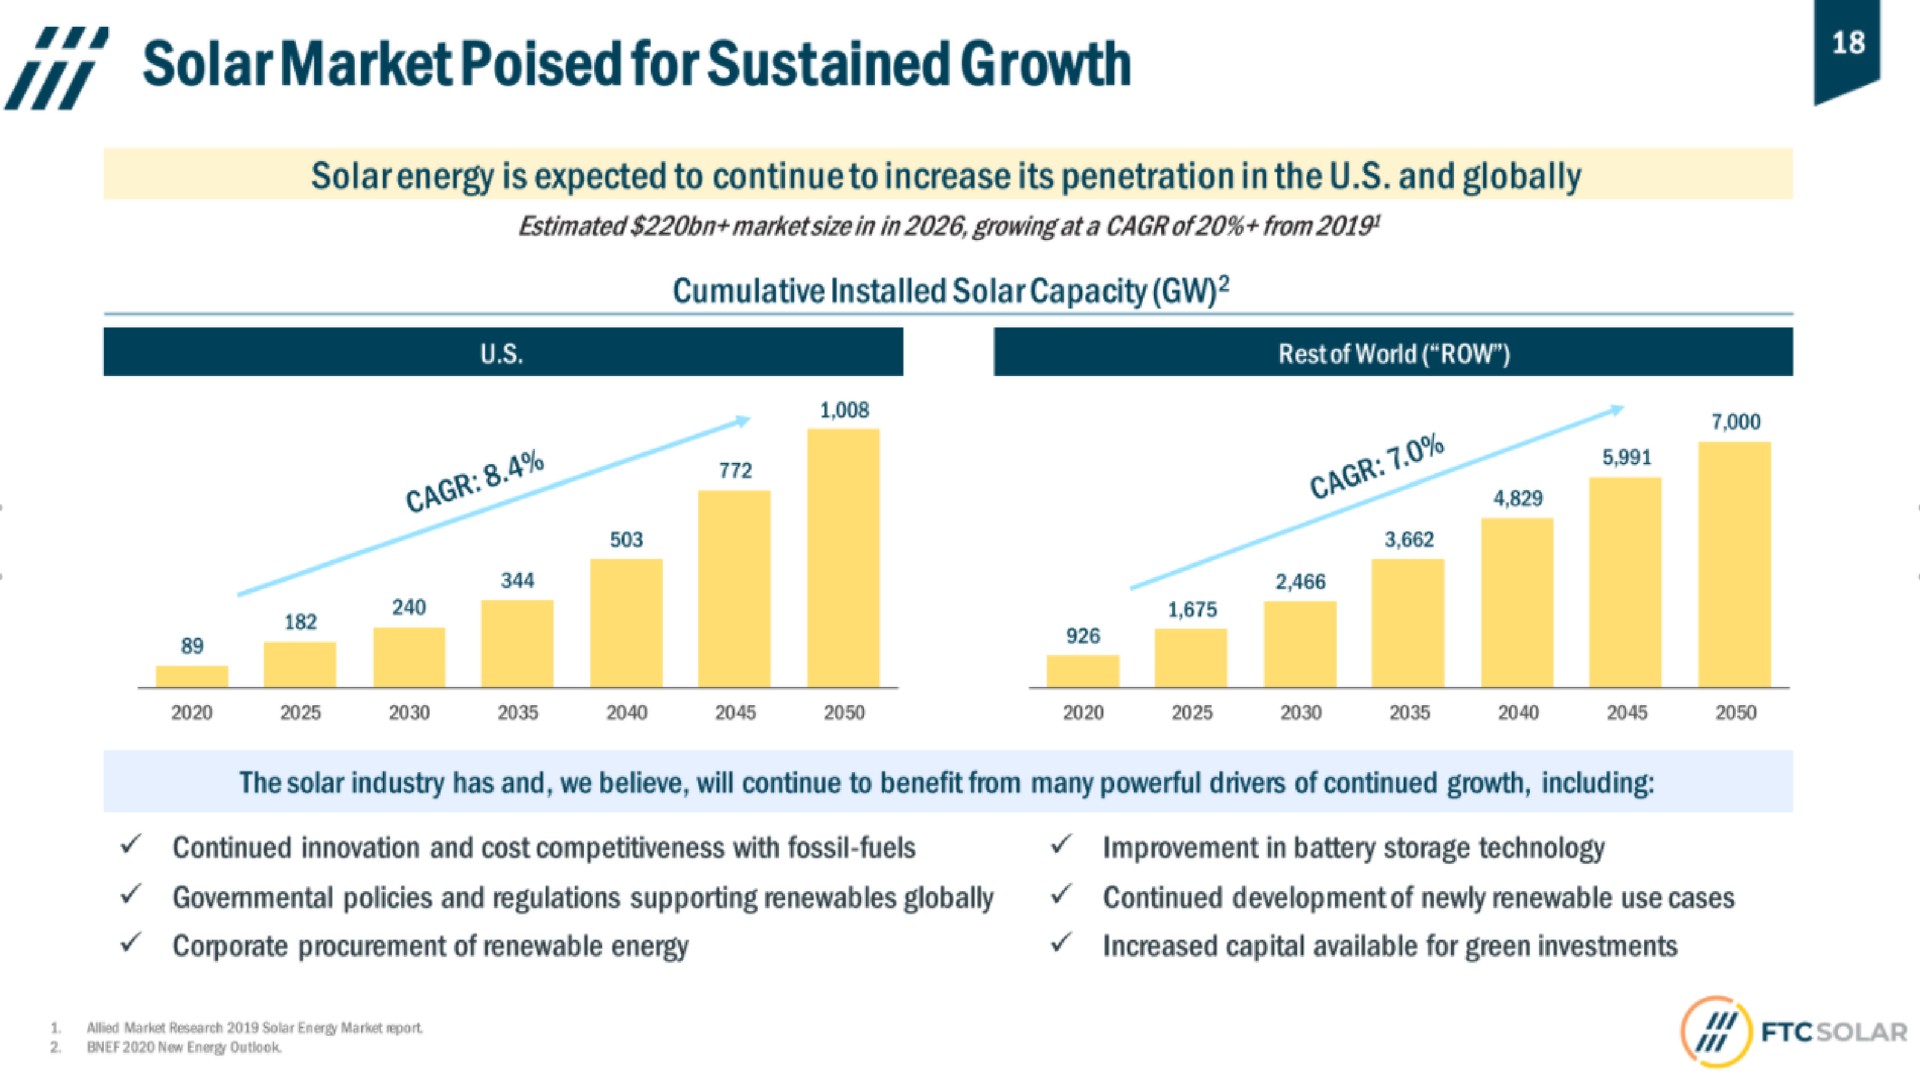 poised for sustained growth | FTC Solar